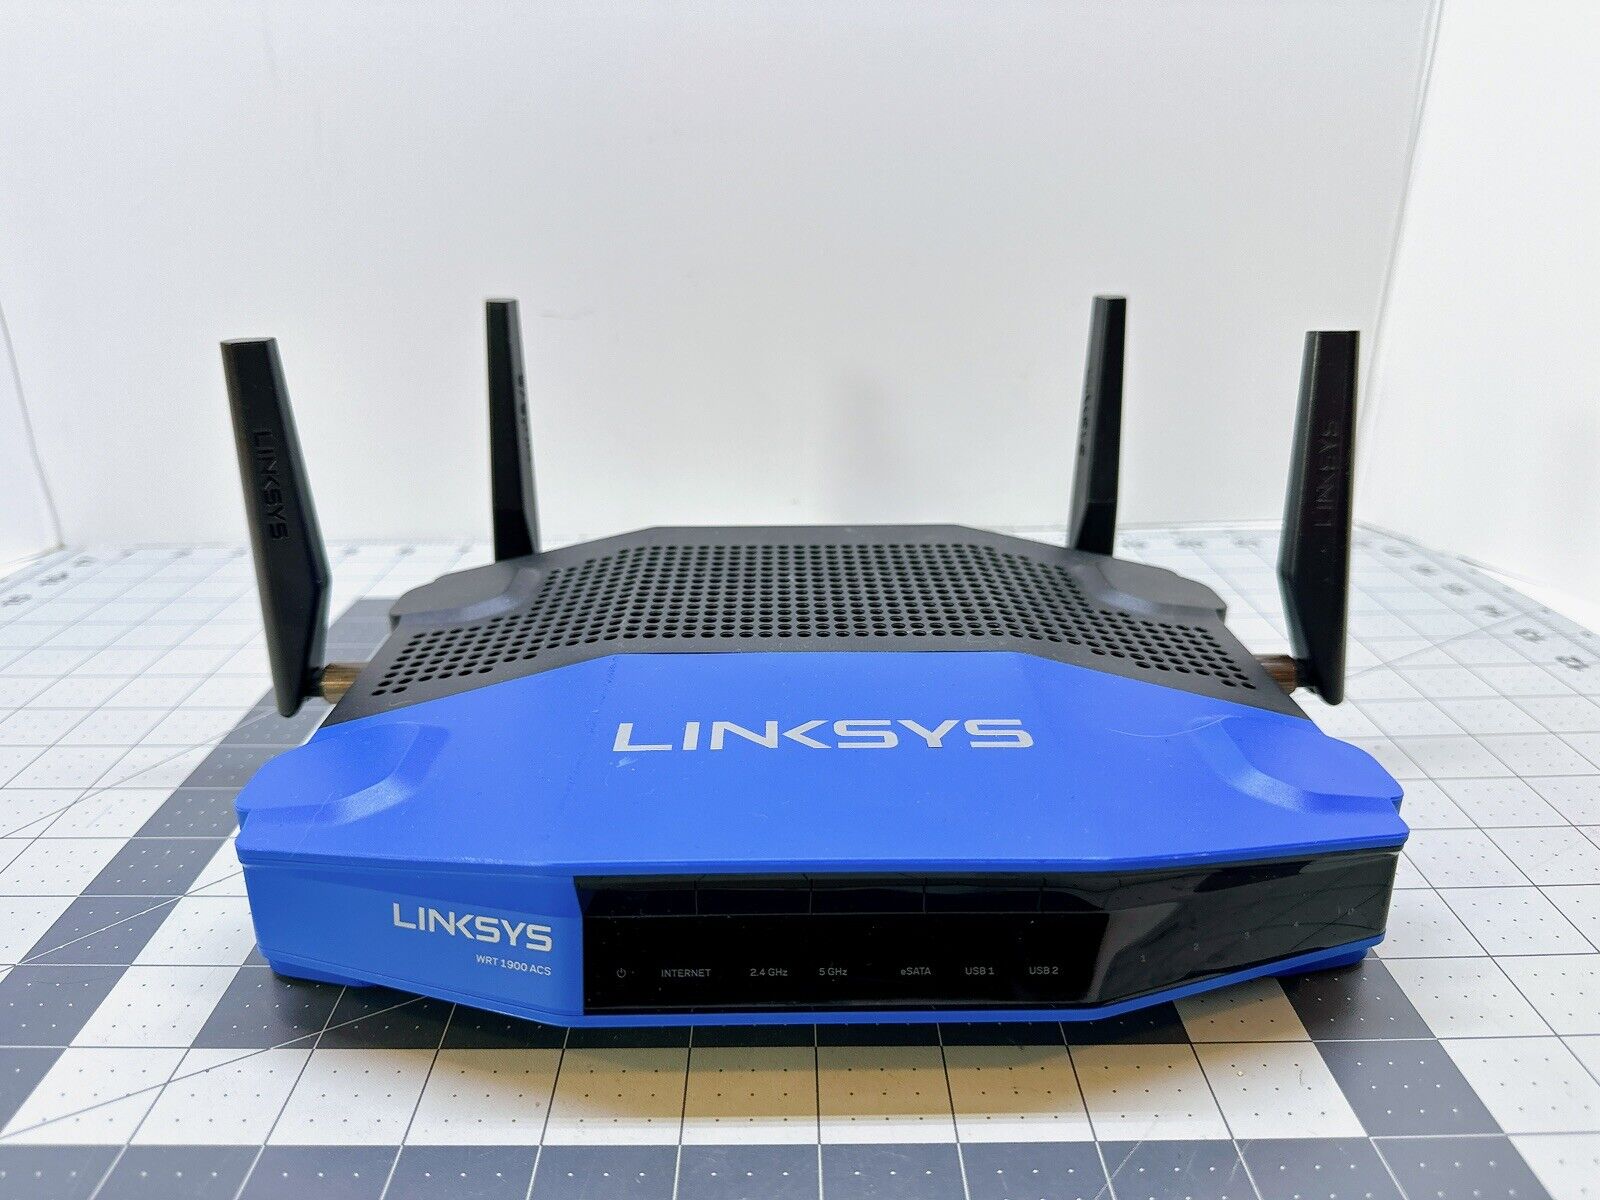 Linksys WRT1900ACS V2 Dual Band Ultra-Fast Wireless WiFi Router w/Antennas Reset